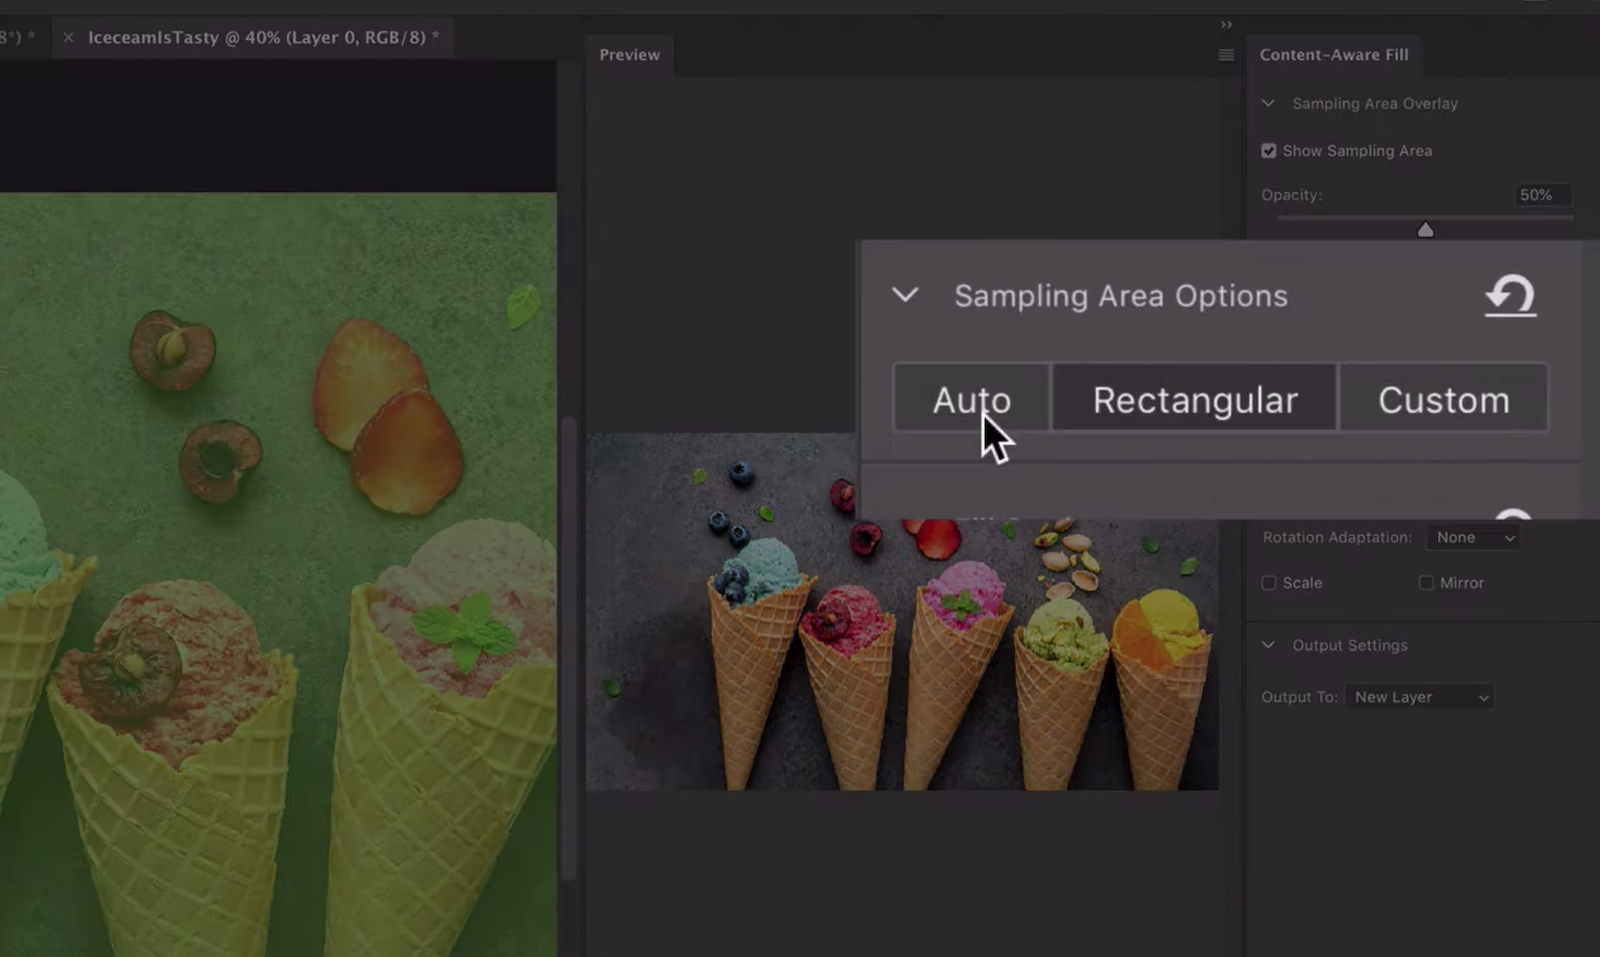 Adobe Shows Off Improved Content Aware Fill Coming Soon To Photoshop